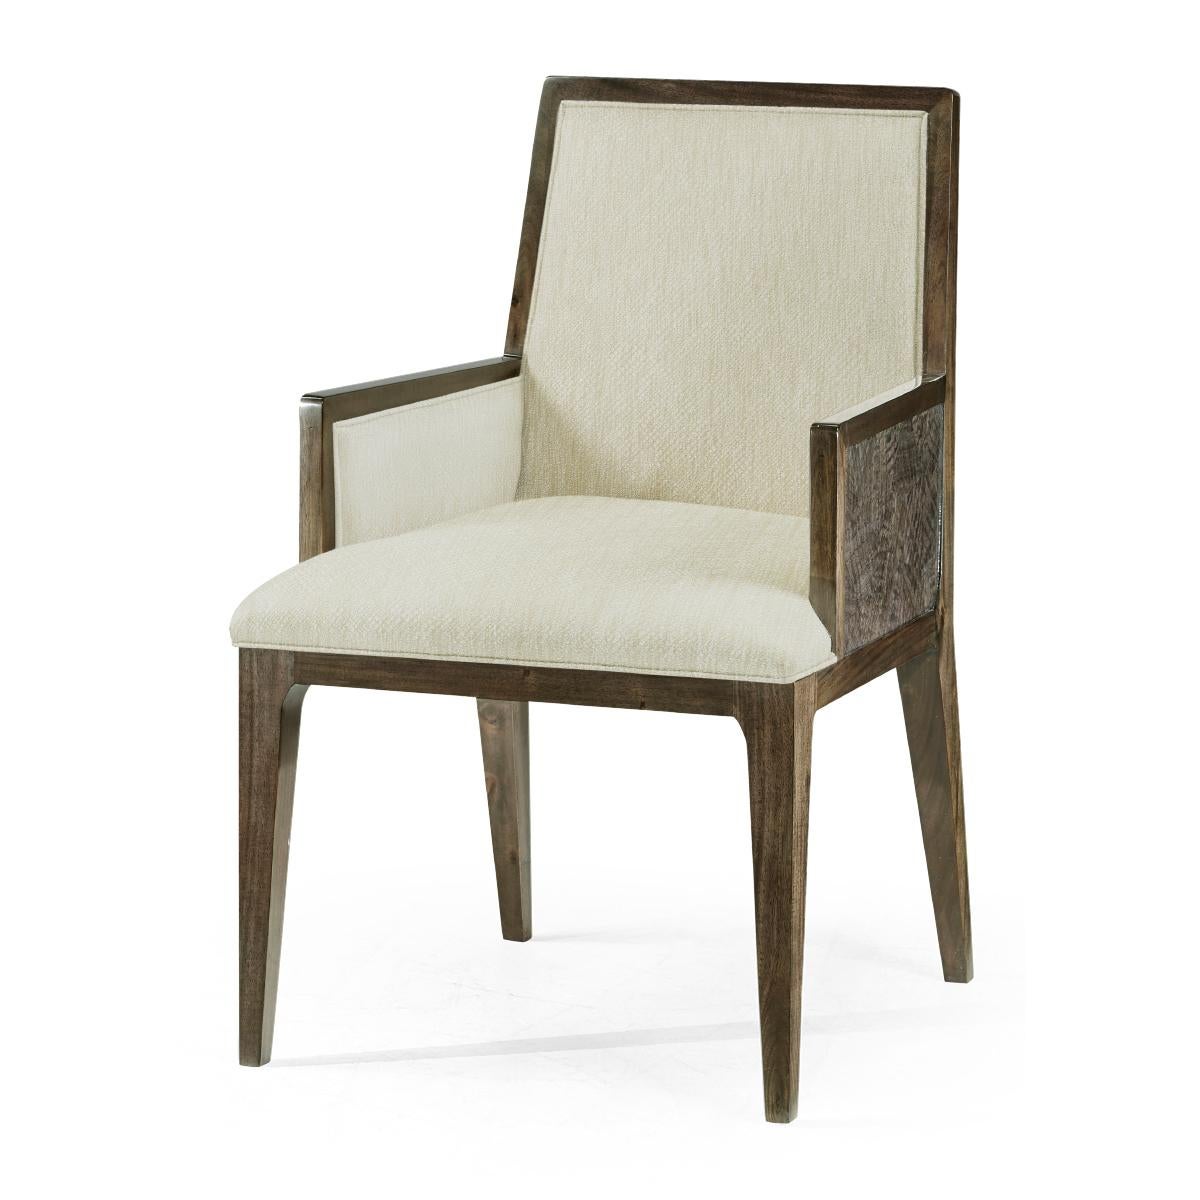 A Mid-Century Modern style greyed walnut dining chair with an upholstered back and seat and raised on square out flaring tapered legs. 

Arm dimensions: 22.25